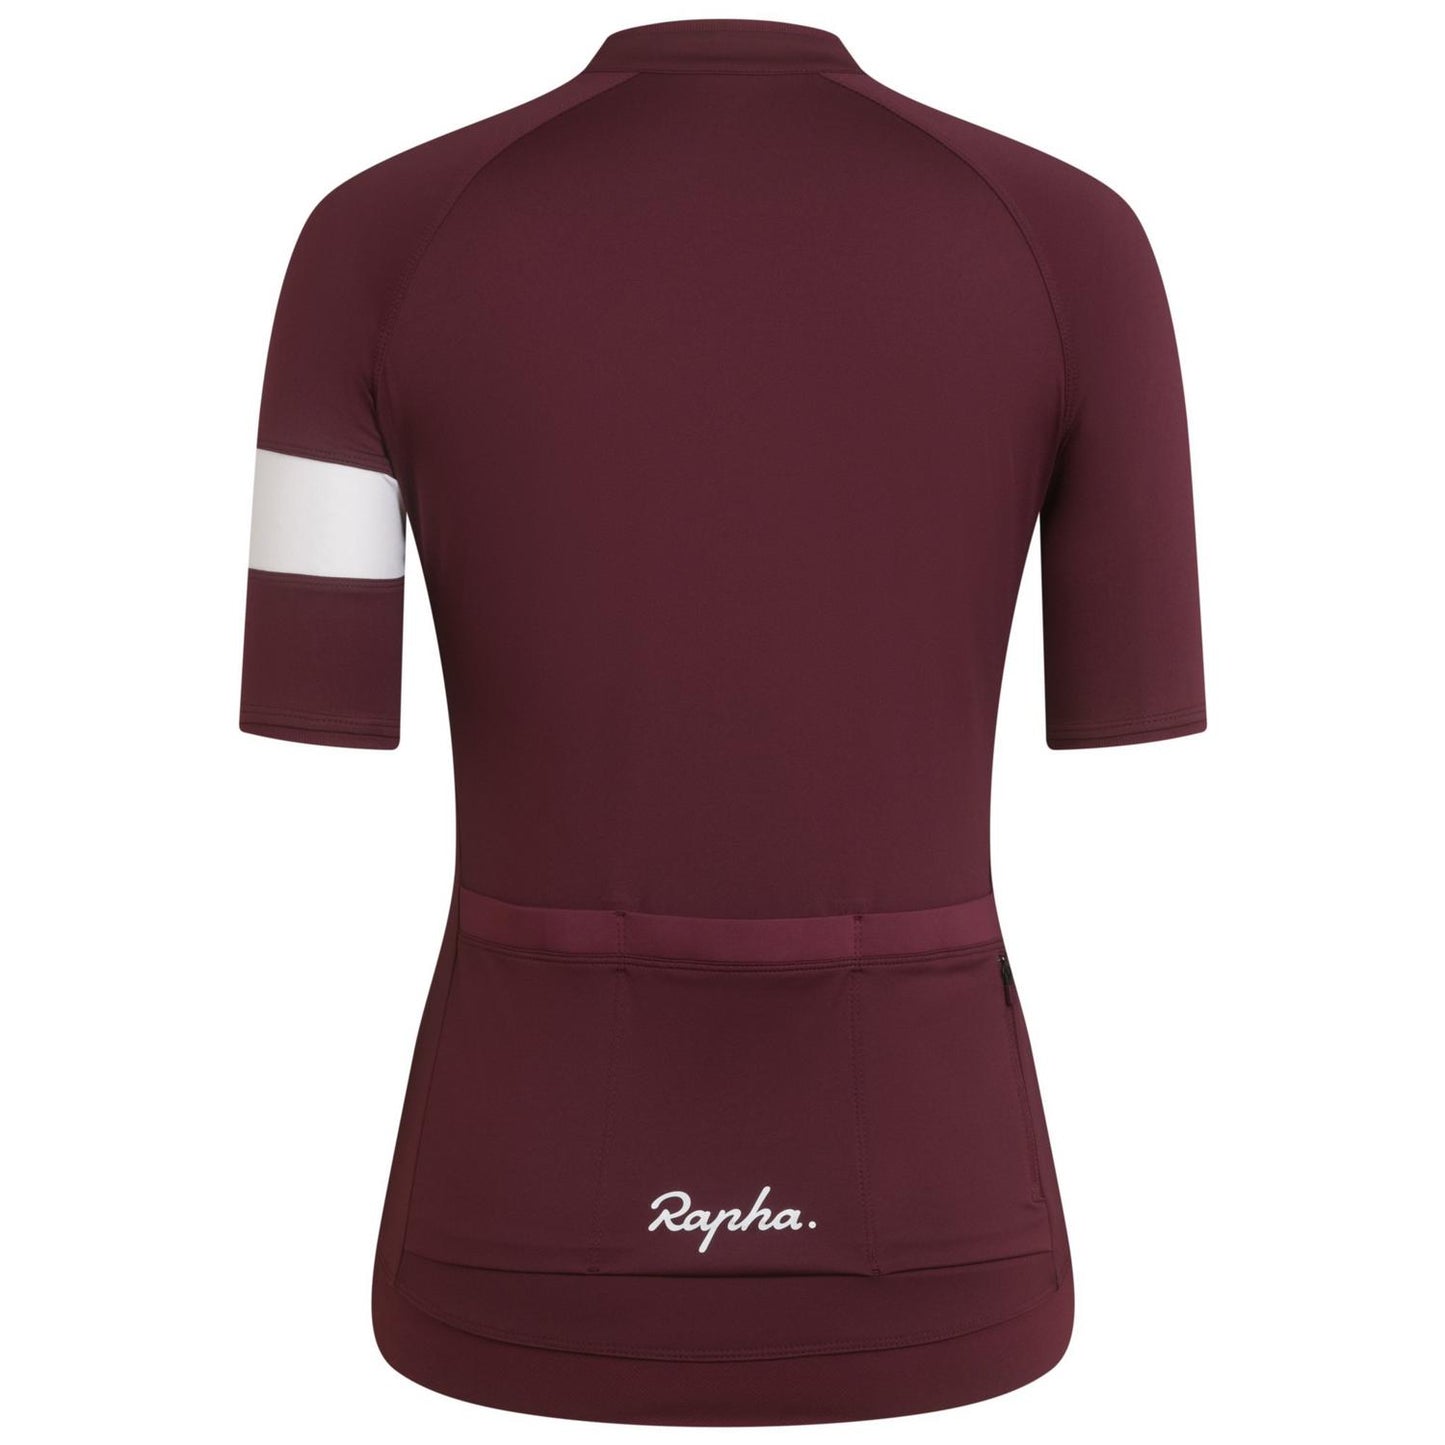 RAPHA Core Dones Maillot de Ciclisme - WWA Whine/White